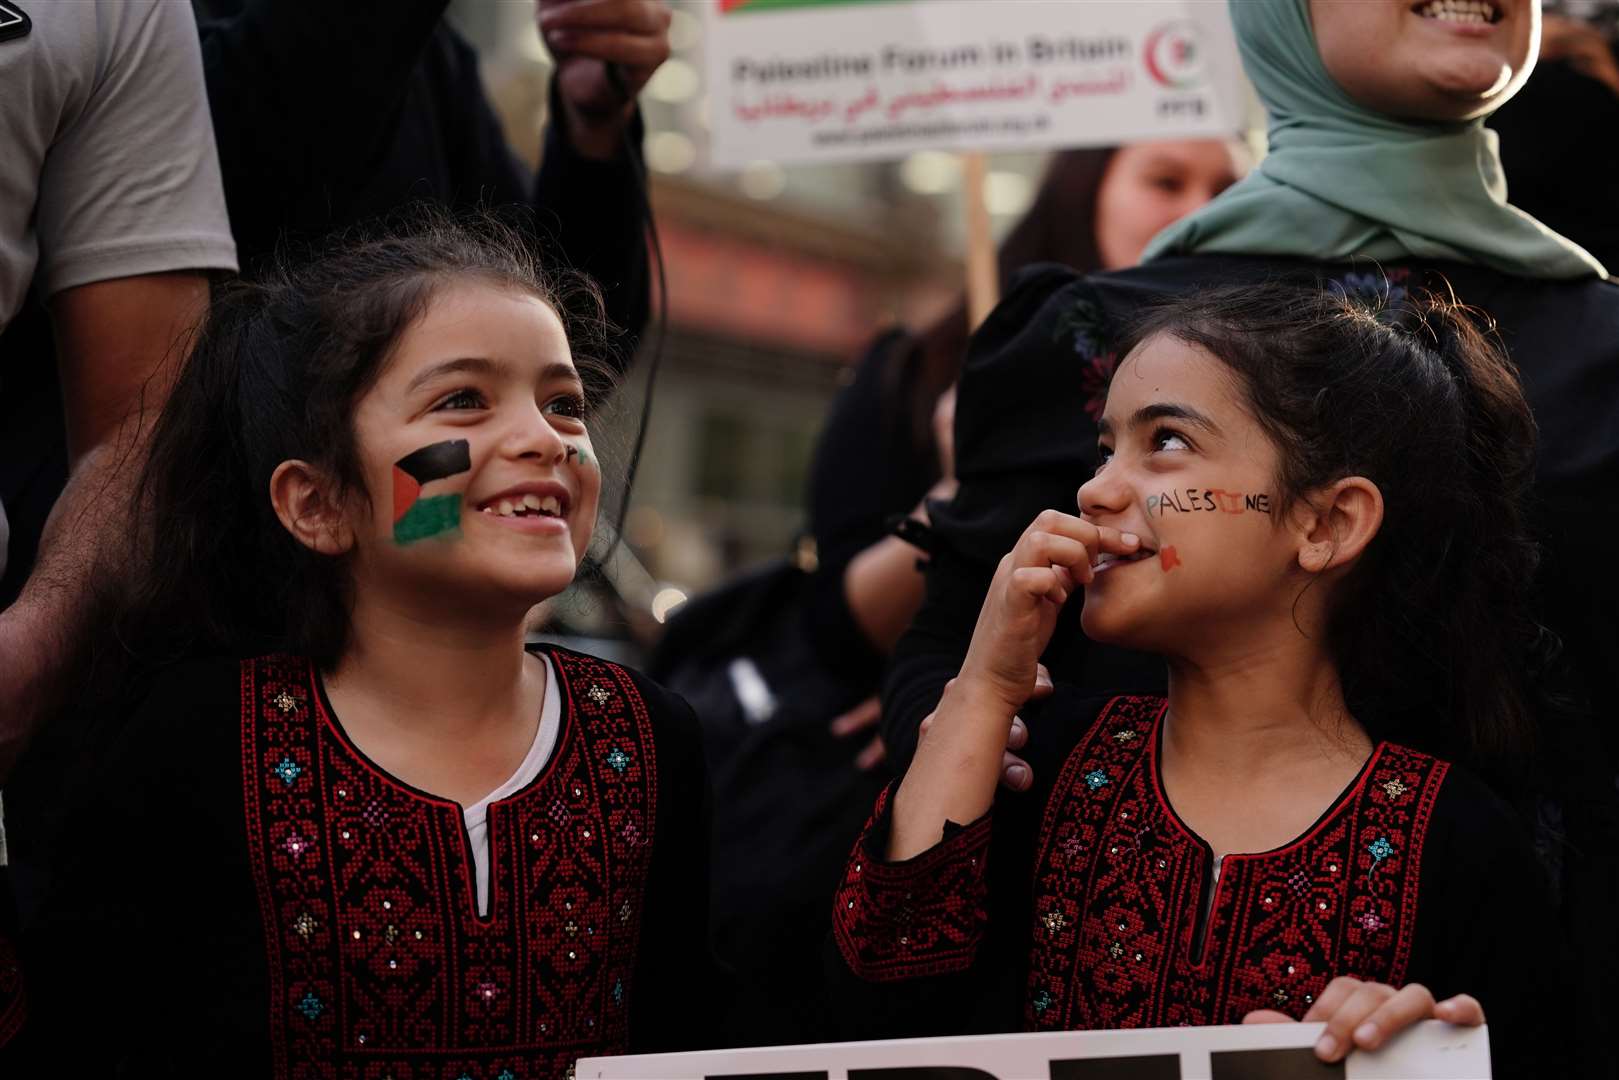 People take part in a Palestine Solidarity Campaign demonstration near the Israeli Embassy, in London (PA)